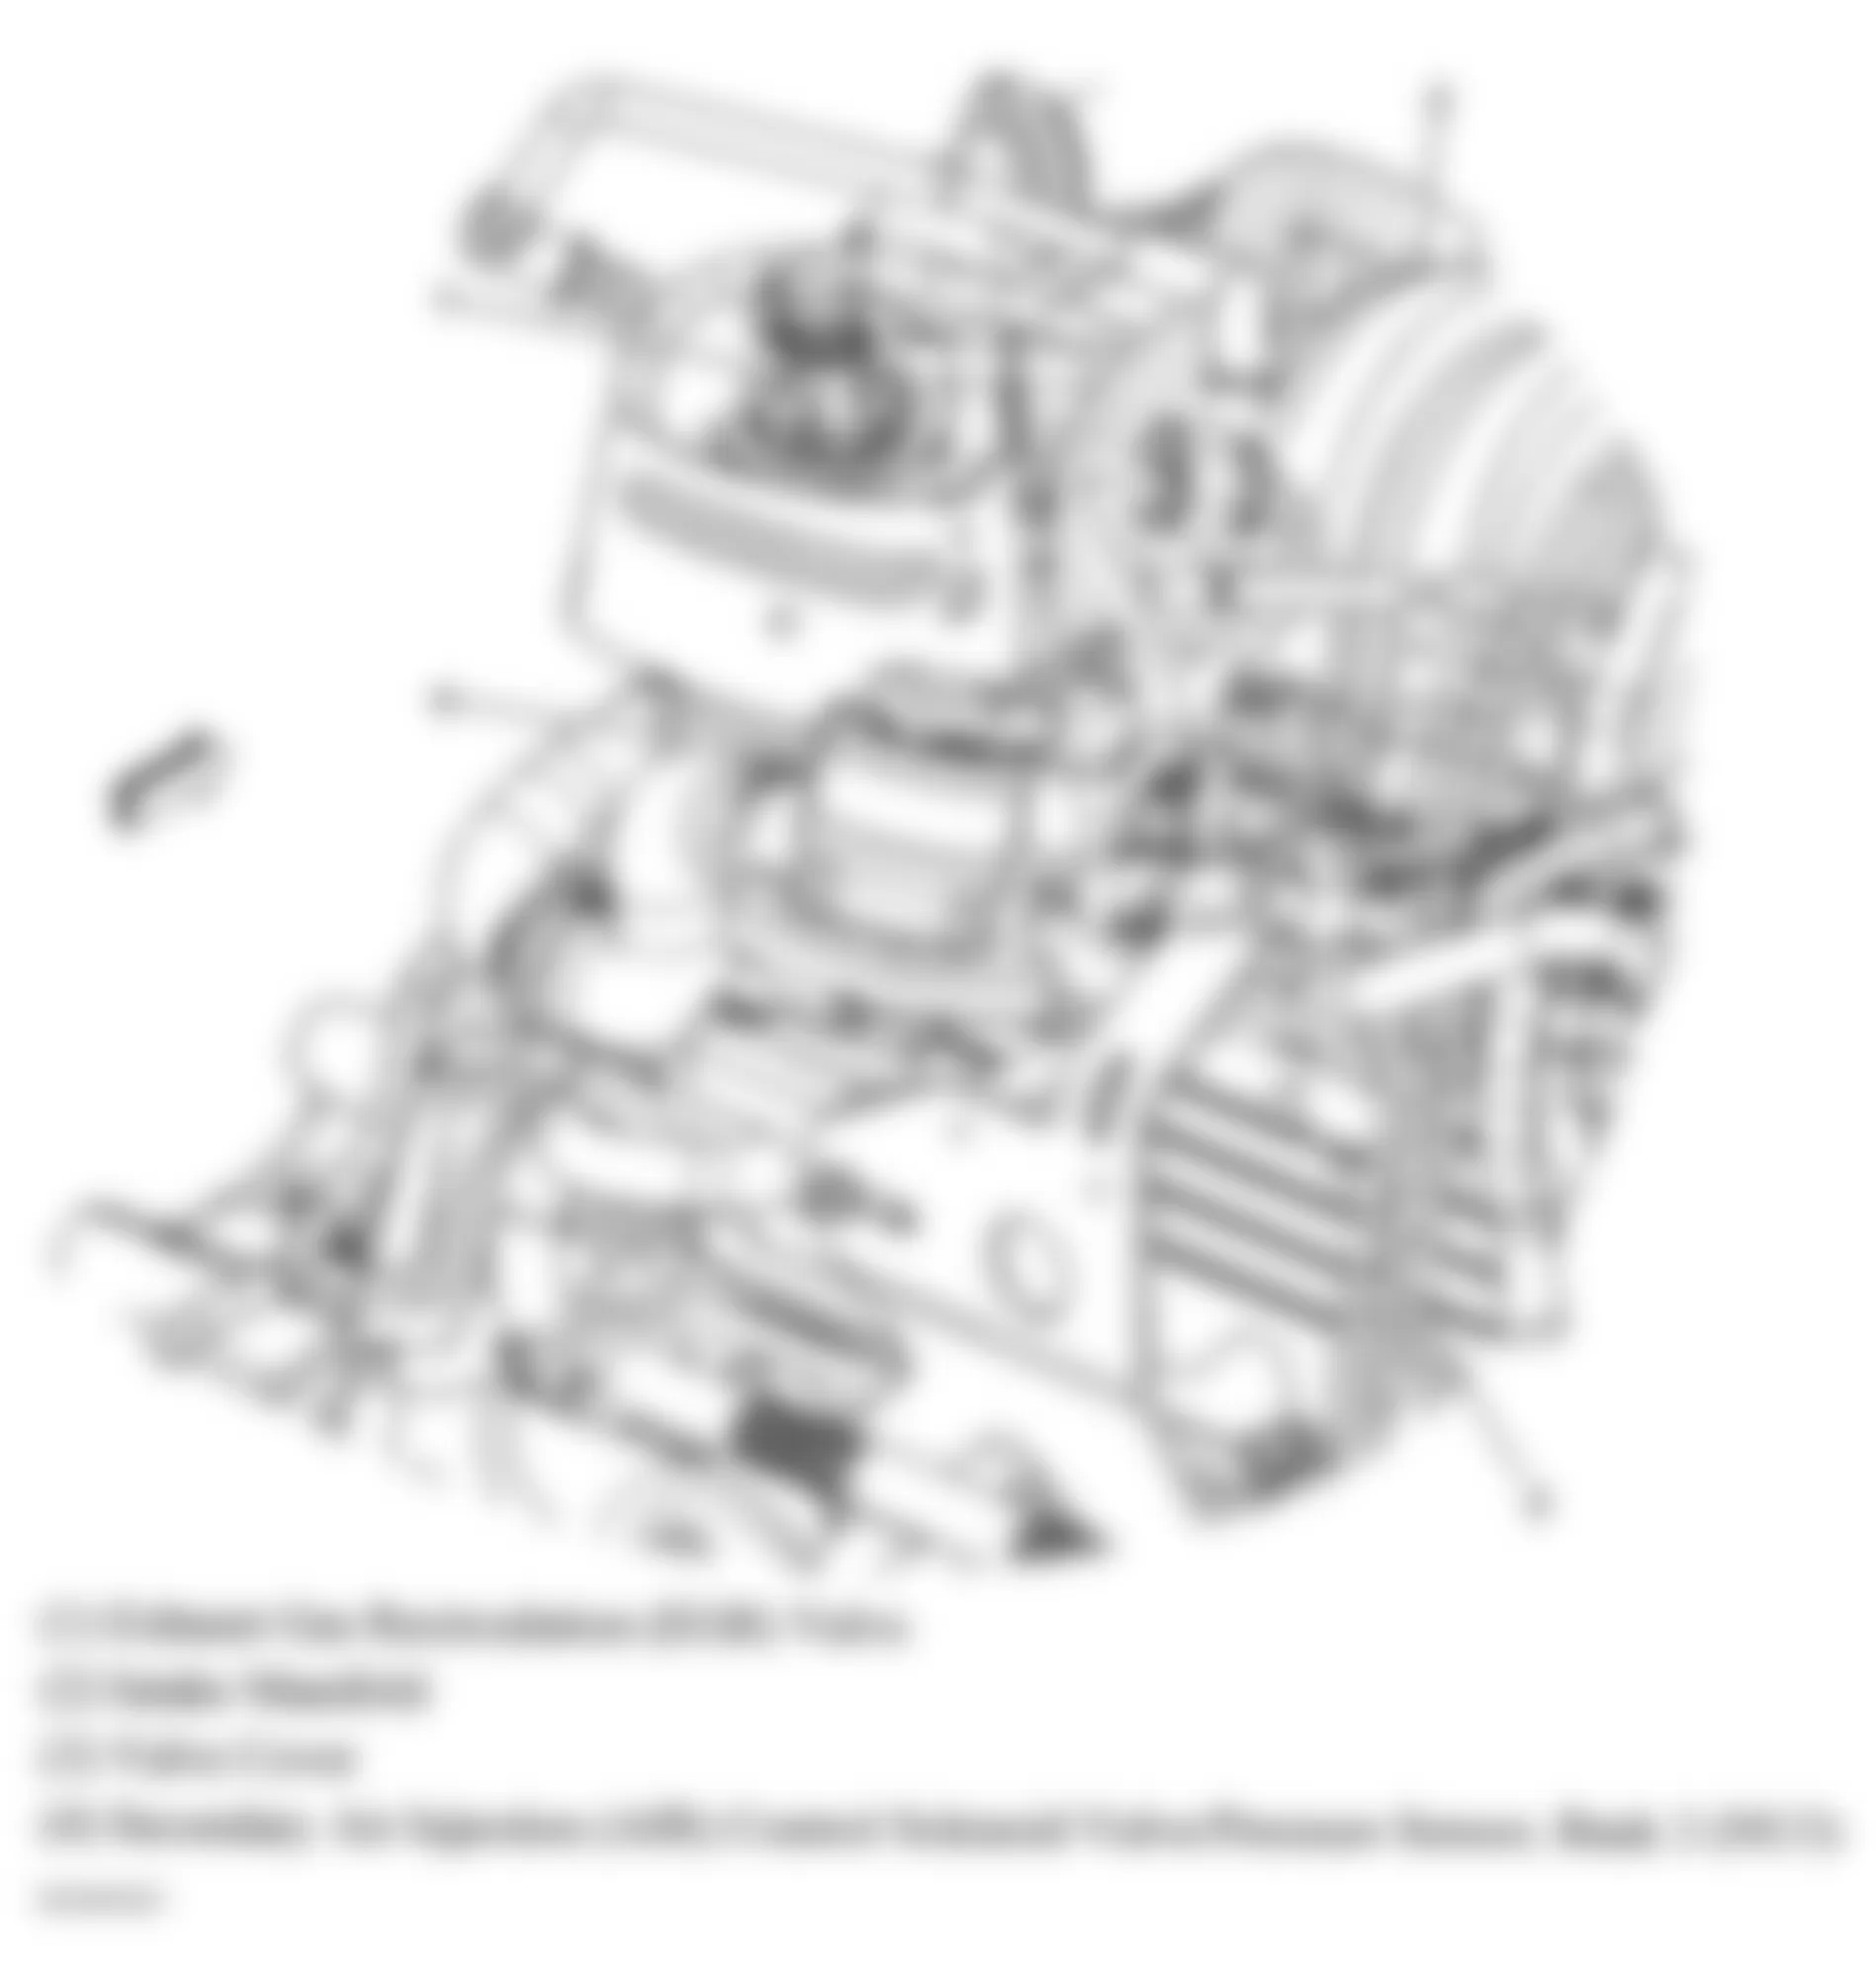 Buick LaCrosse CX 2006 - Component Locations -  Upper Rear Of Engine (3.8L)